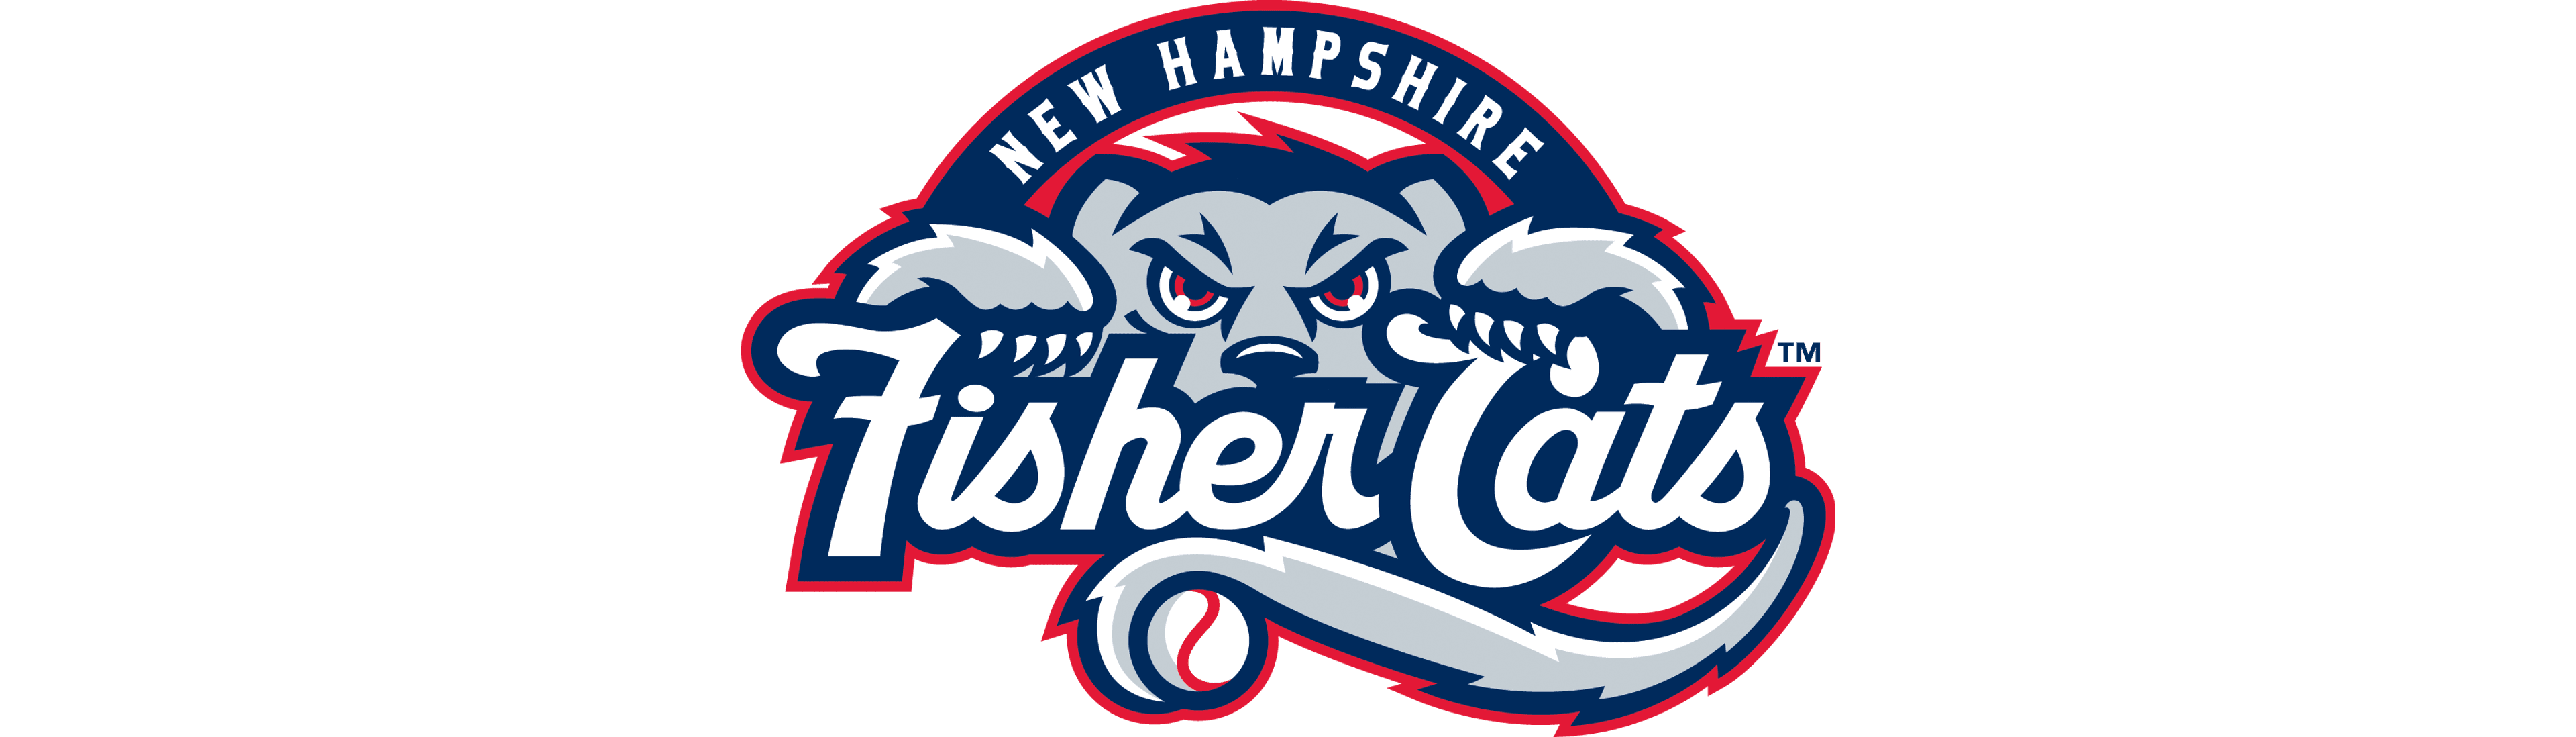 Fisher Cats Vs. Rumble Ponies 4/27 logo image